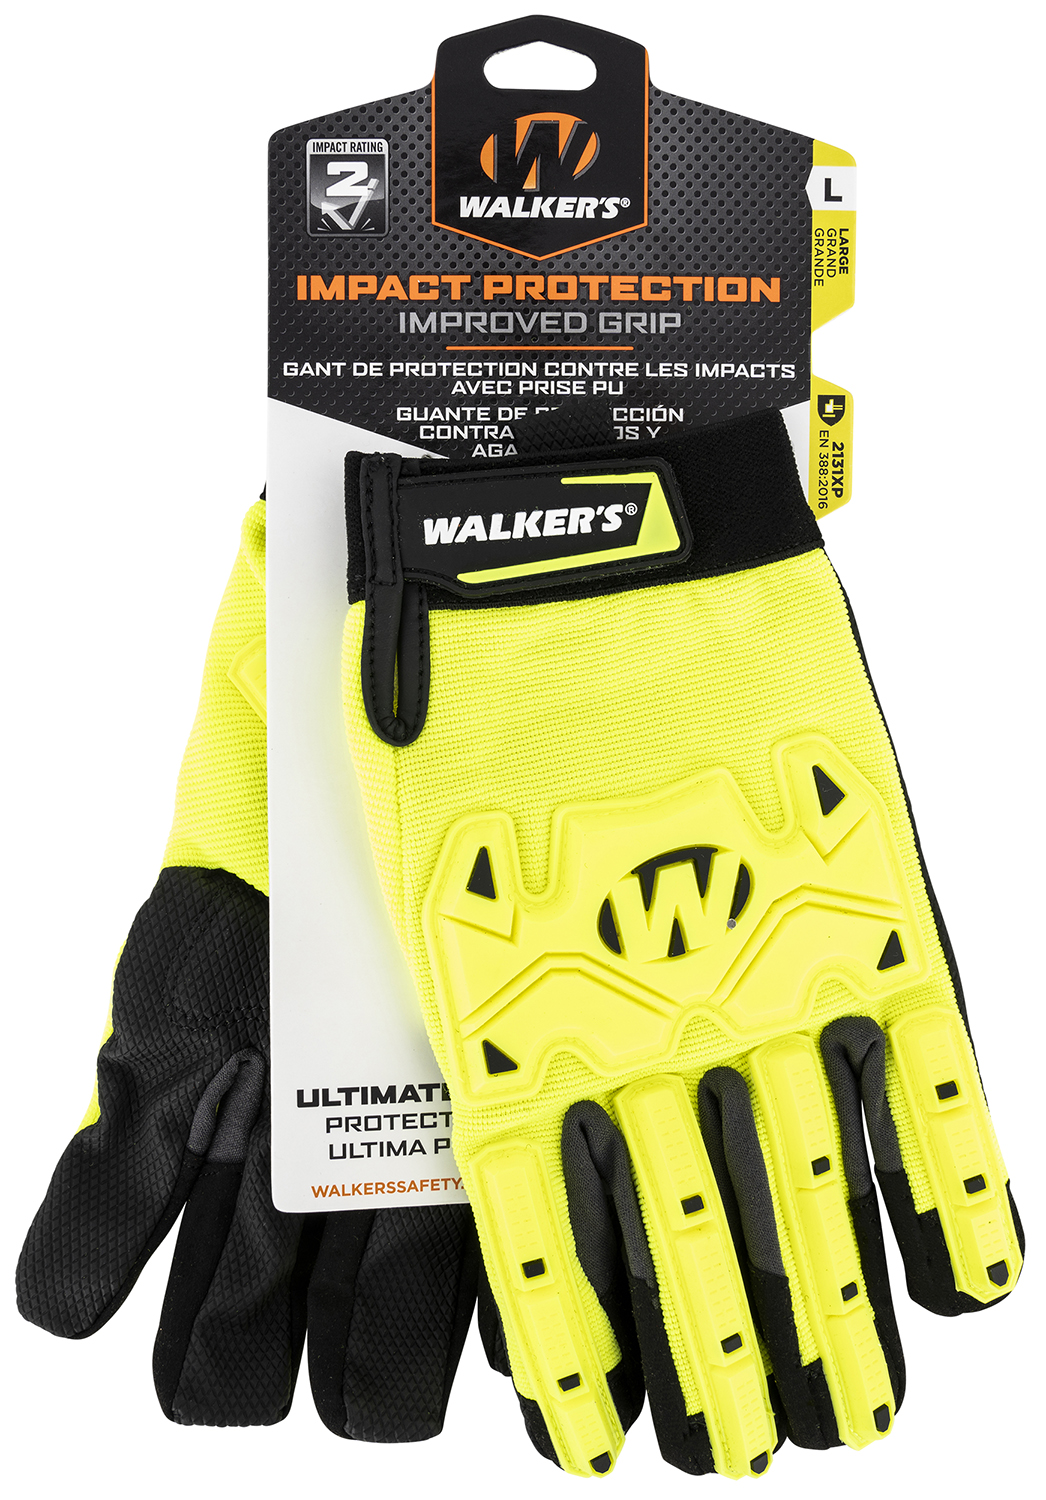 Walker's GWPSFHVFFPUIL2LG Impact Protection Gloves Black/Yellow Large...-img-0